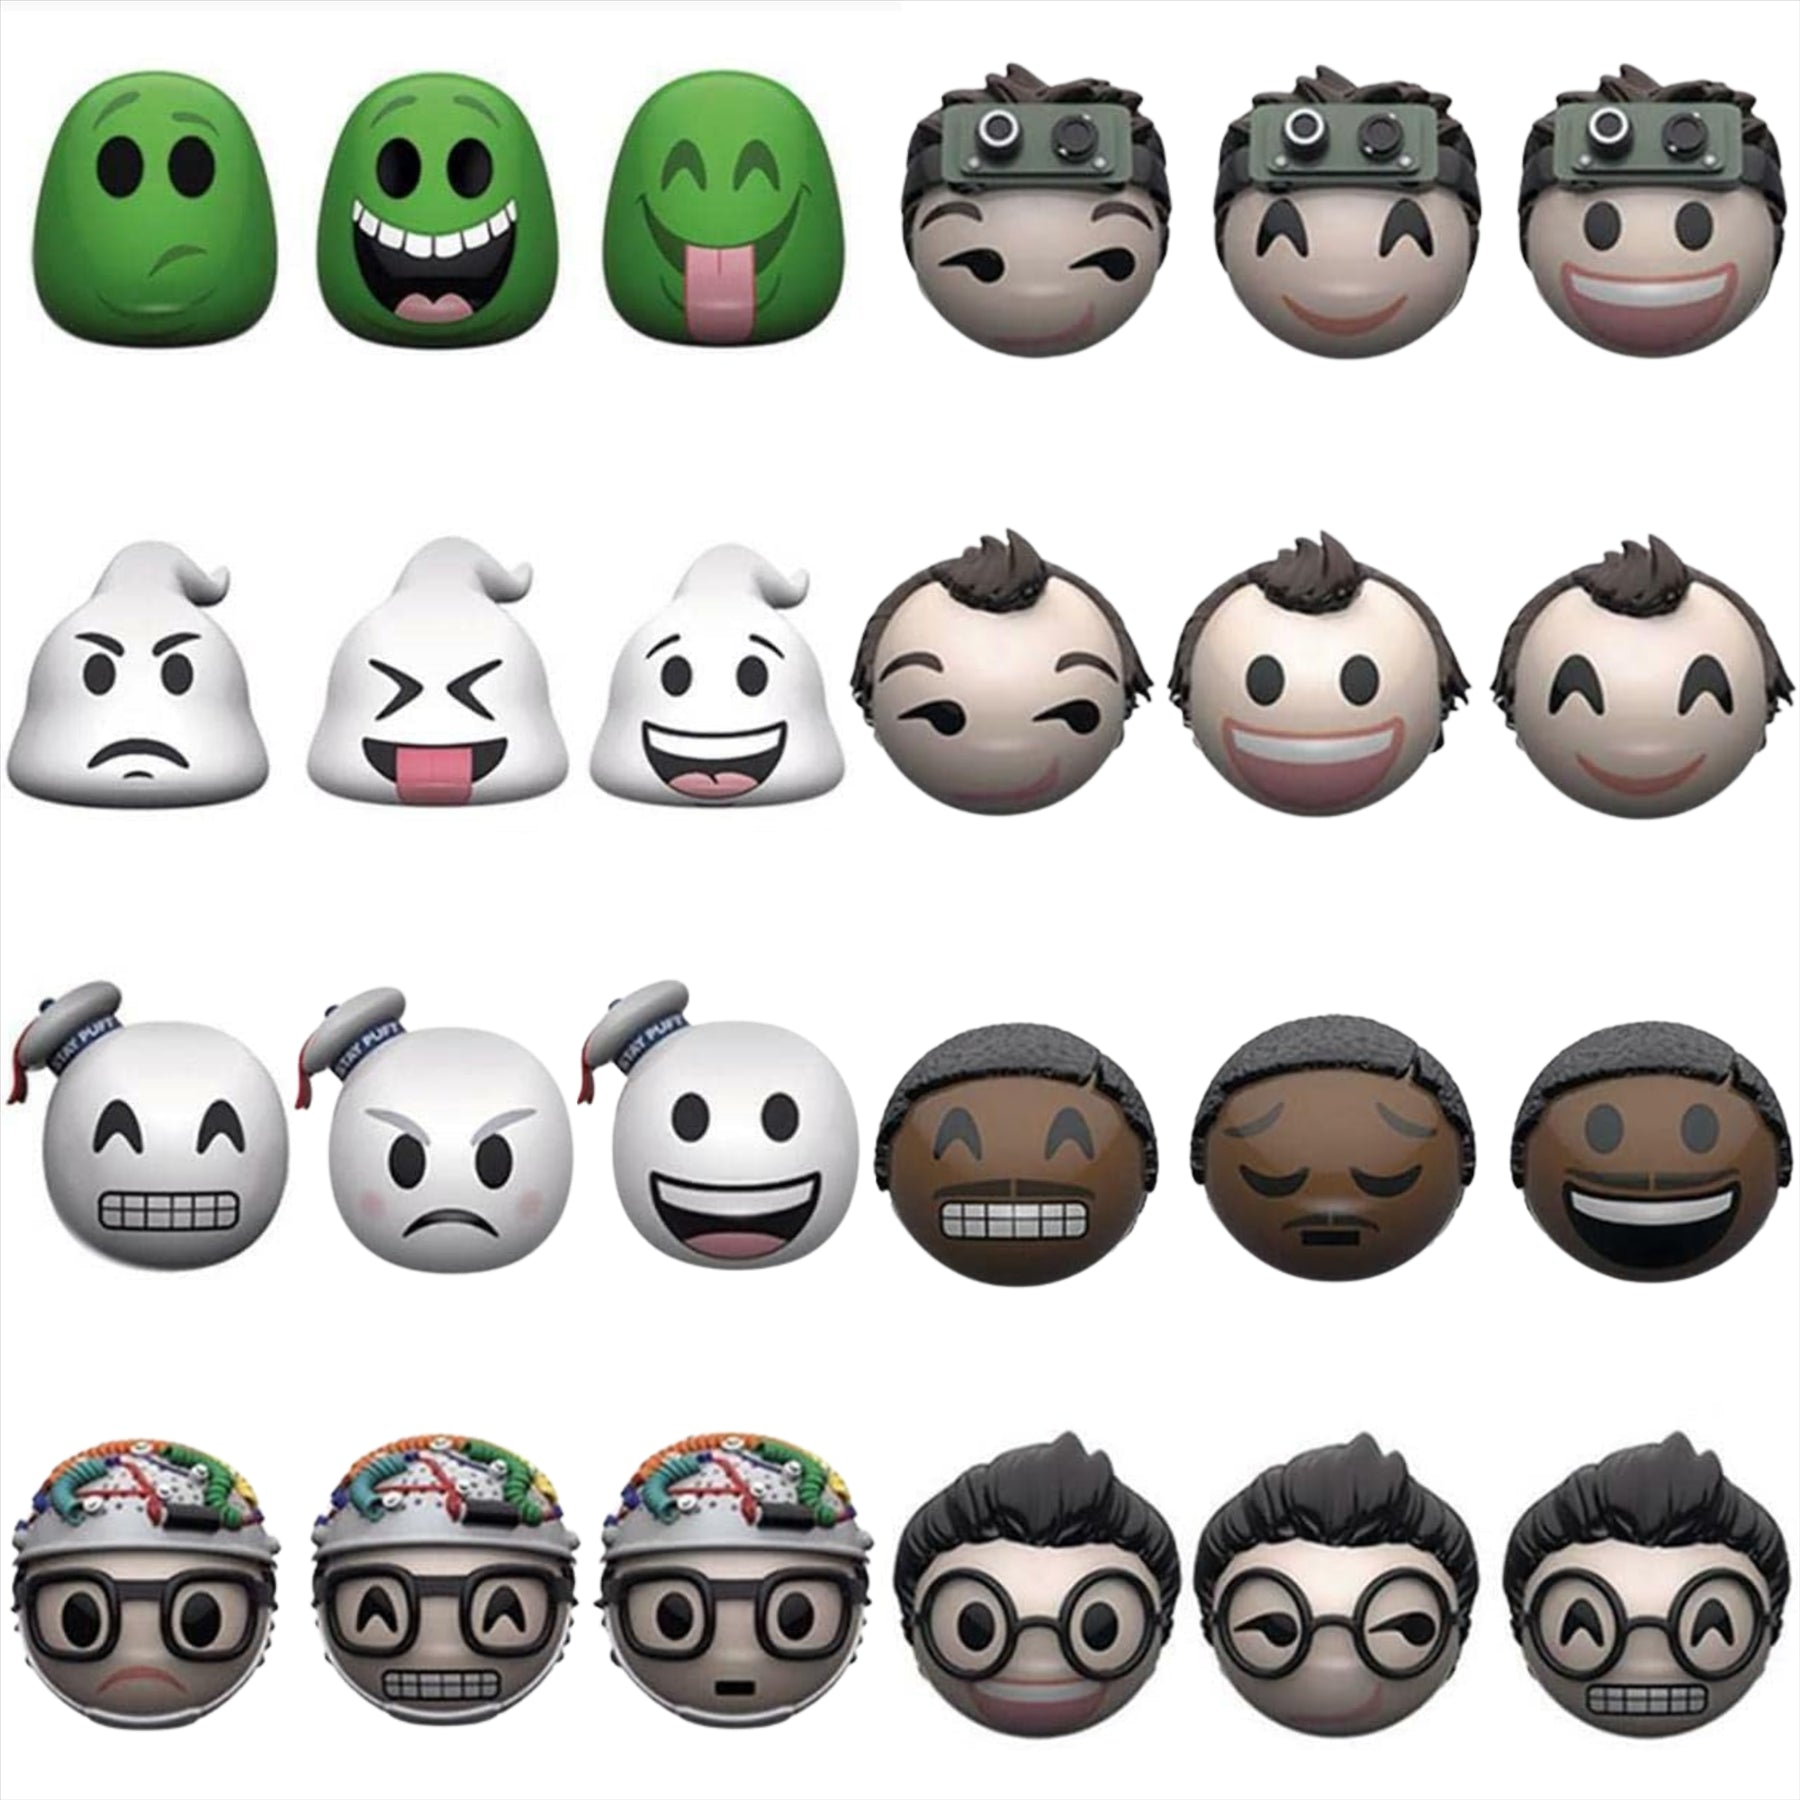 Ghostbuster - FunkoMyMoji Identified 4cm Collectible & Highly Detailed Figure Heads - Complete Set of All 24 - Toptoys2u